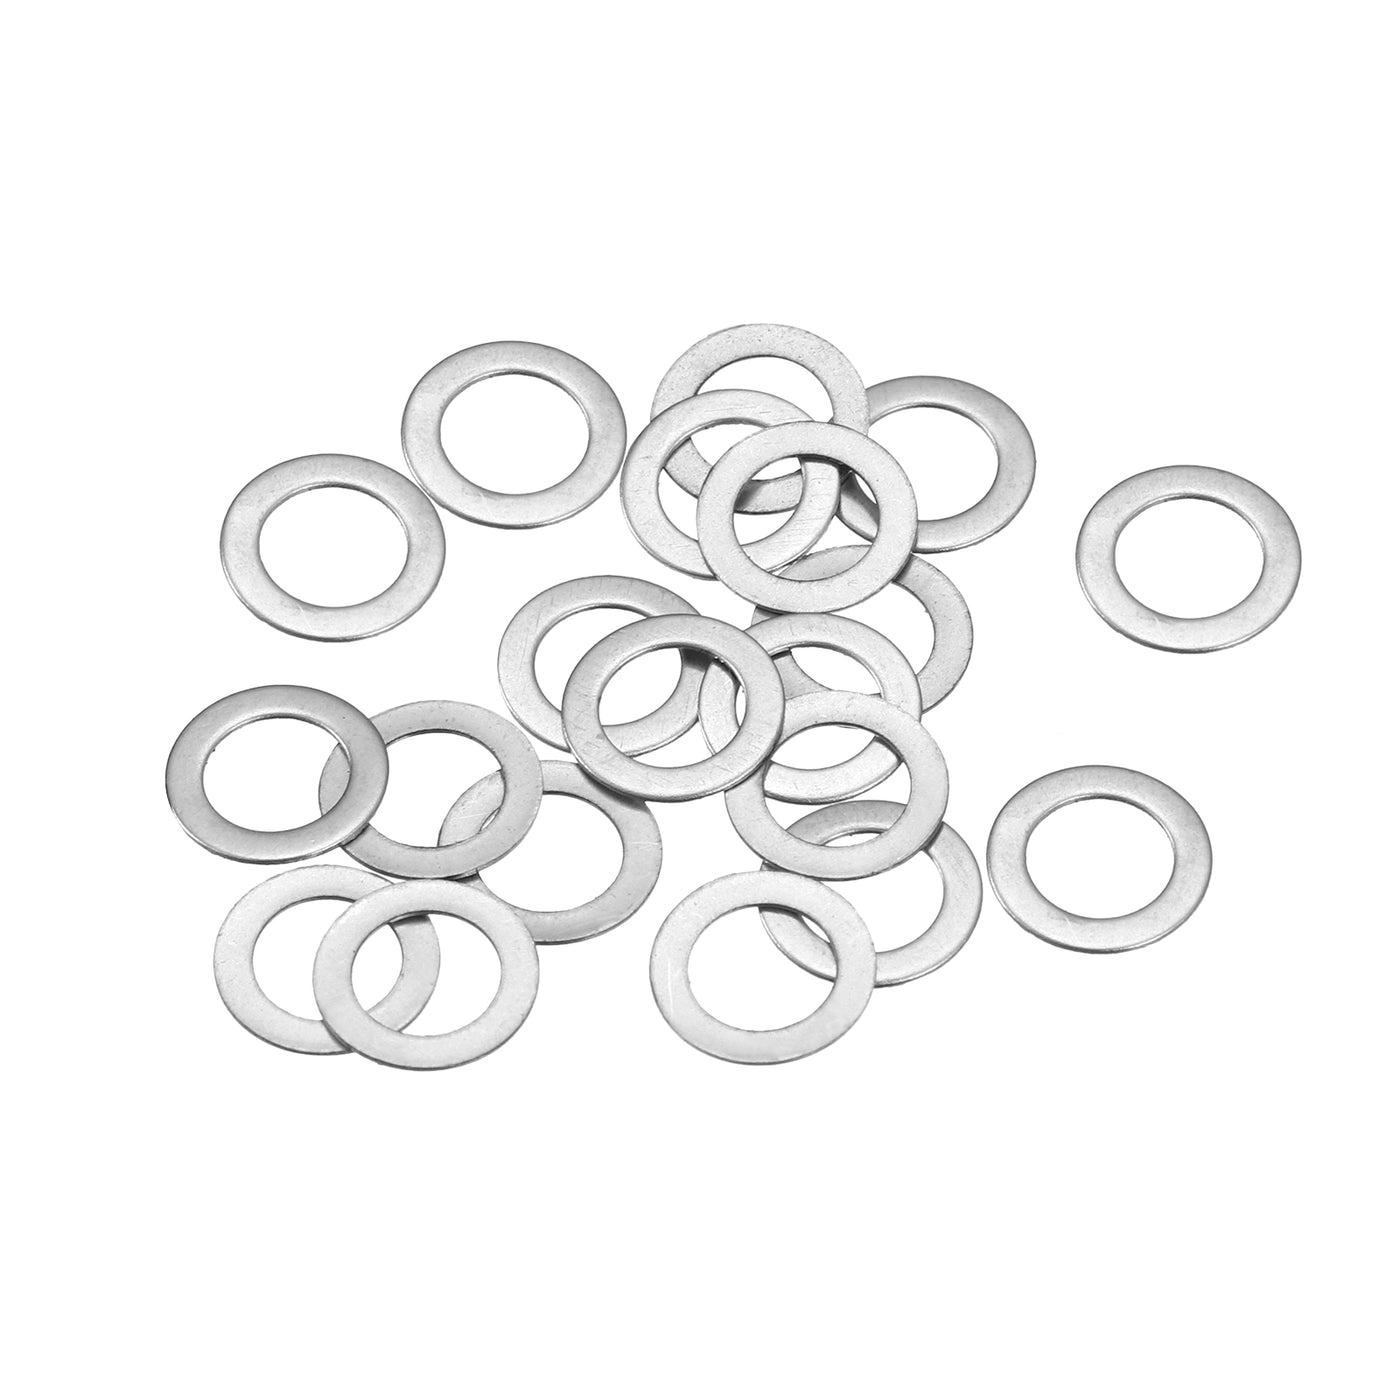 uxcell Uxcell M5 304 Stainless Steel Flat Washers, 20pcs 5x8x0.5mm Ultra Thin Flat Spacers